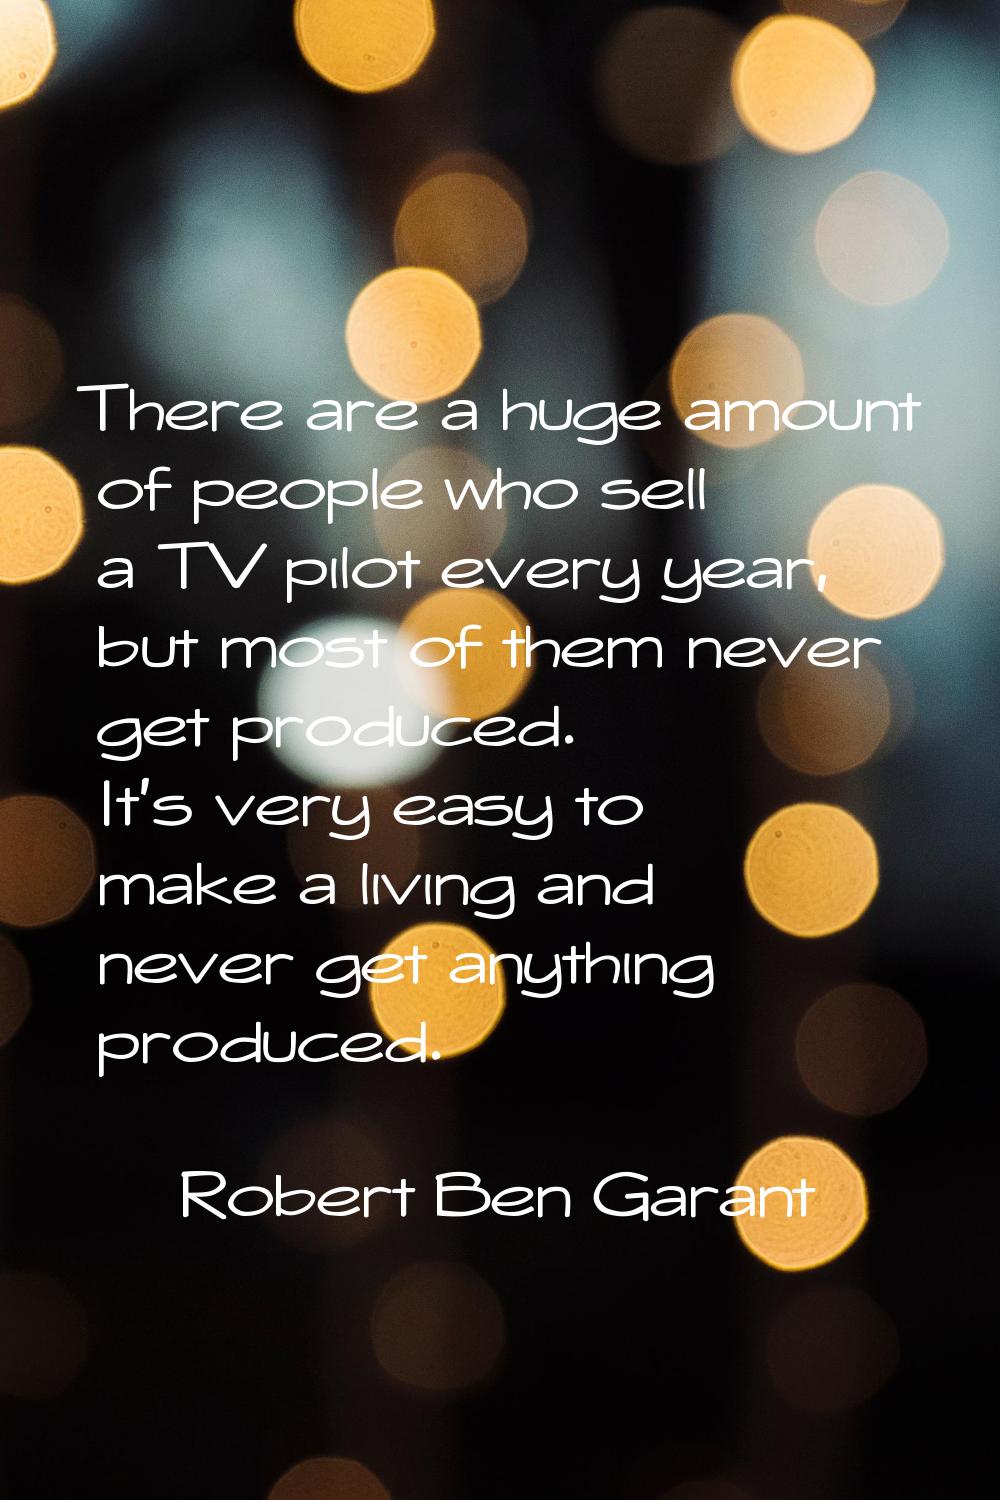 There are a huge amount of people who sell a TV pilot every year, but most of them never get produc